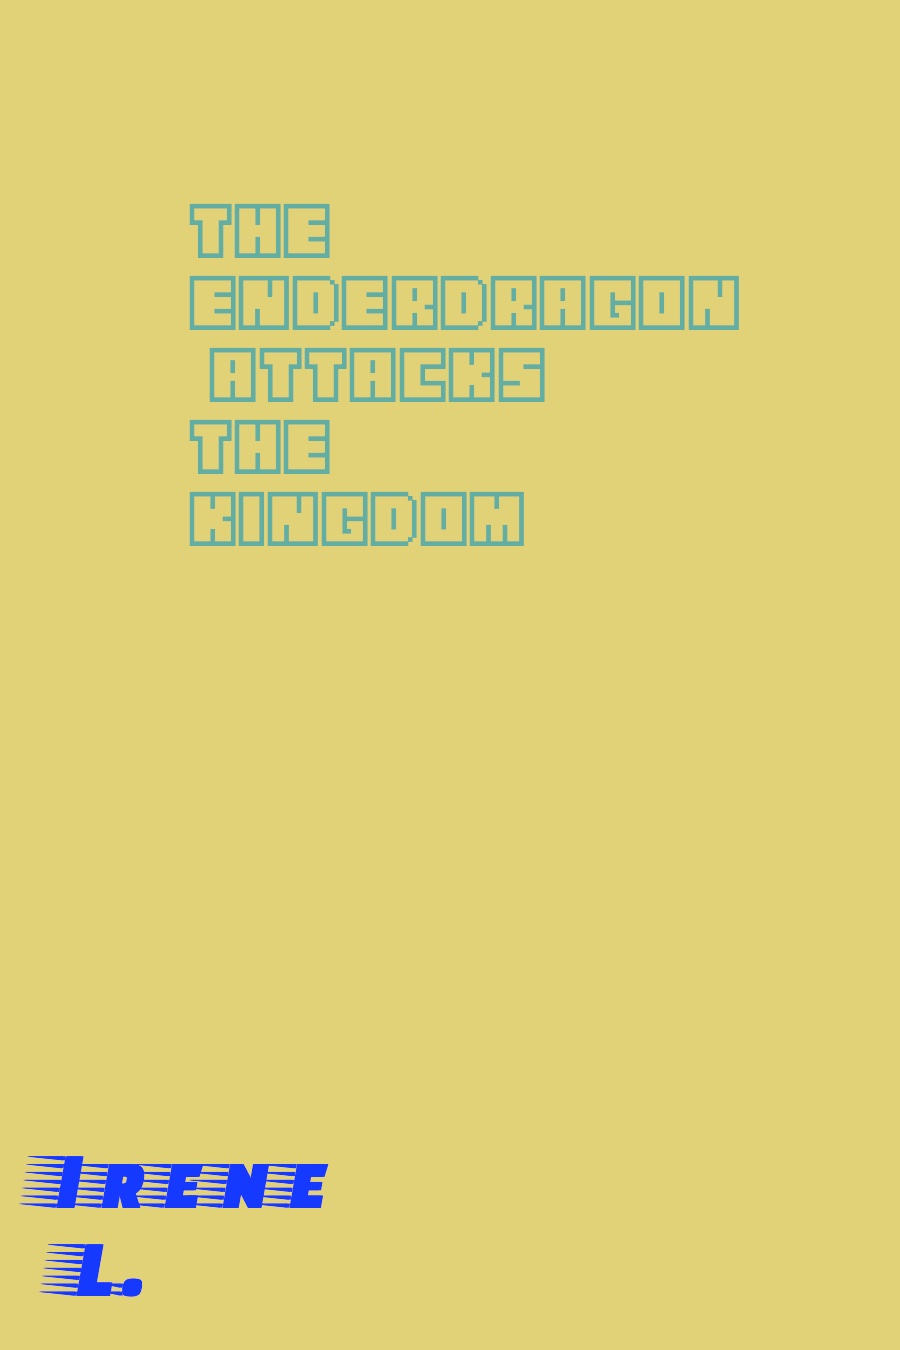 The Enderdragon Attacks the Kingdom by Irene L